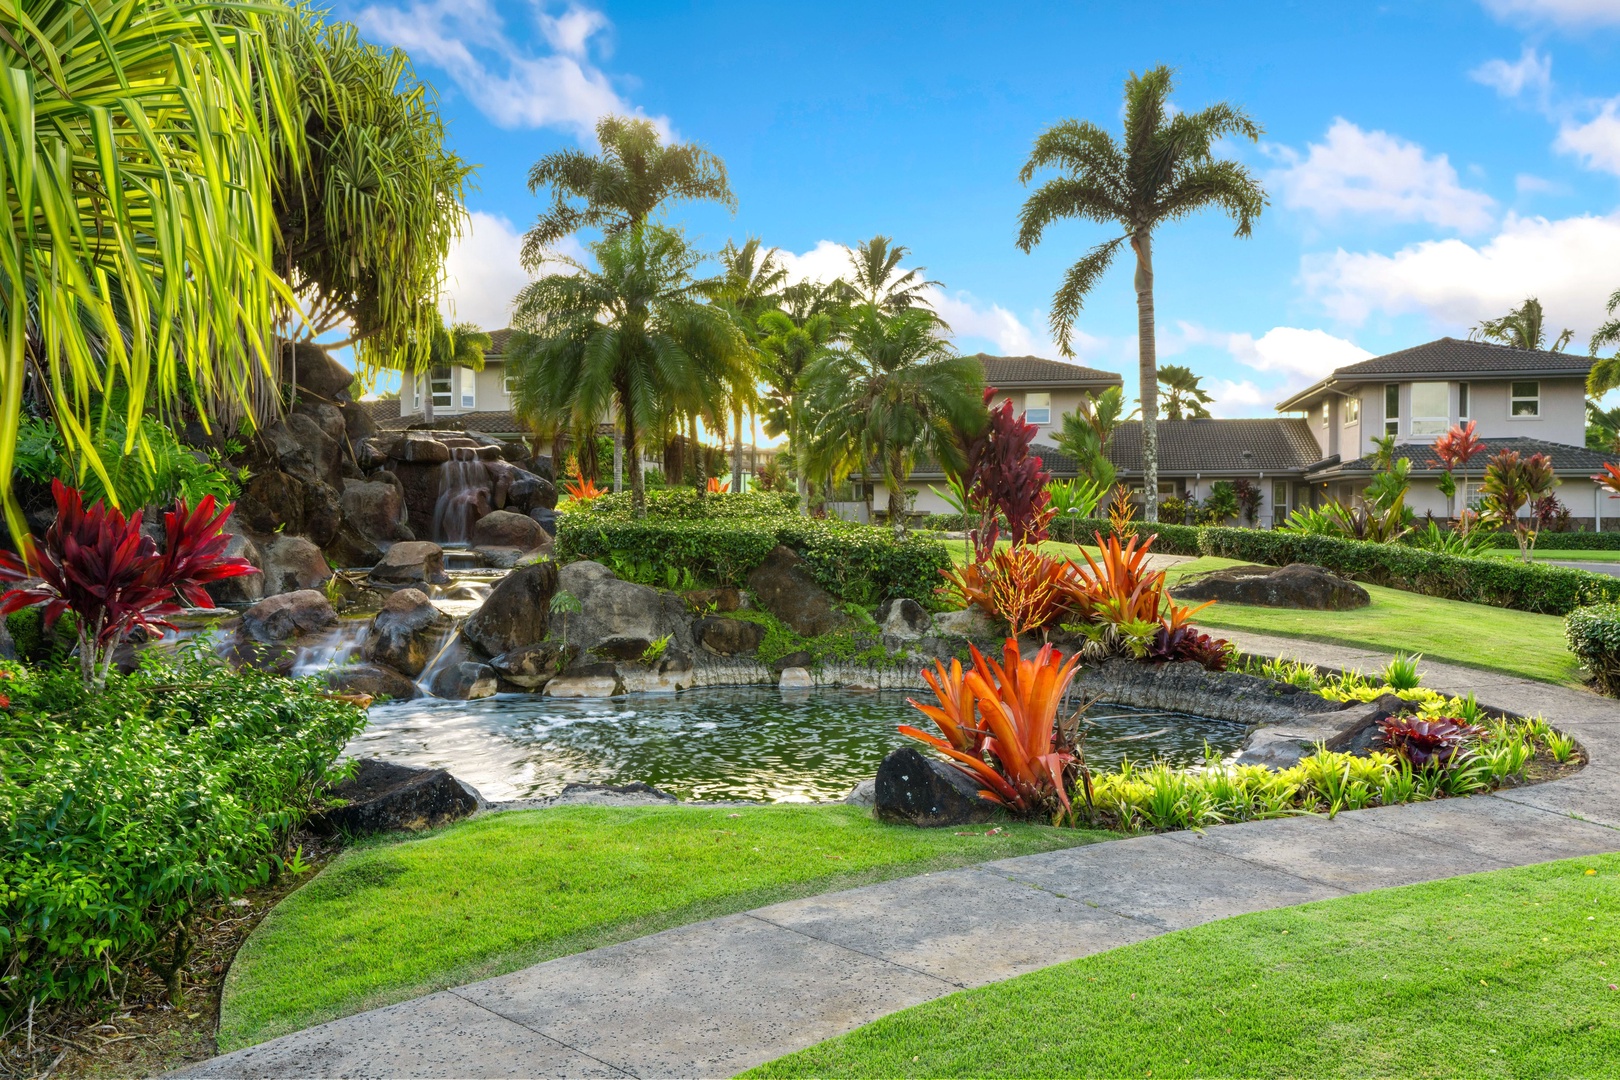 Princeville Vacation Rentals, Tropical Elegance - Our garden's beauty is a labor of love, meticulously maintained to create a tranquil retreat for all seasons.